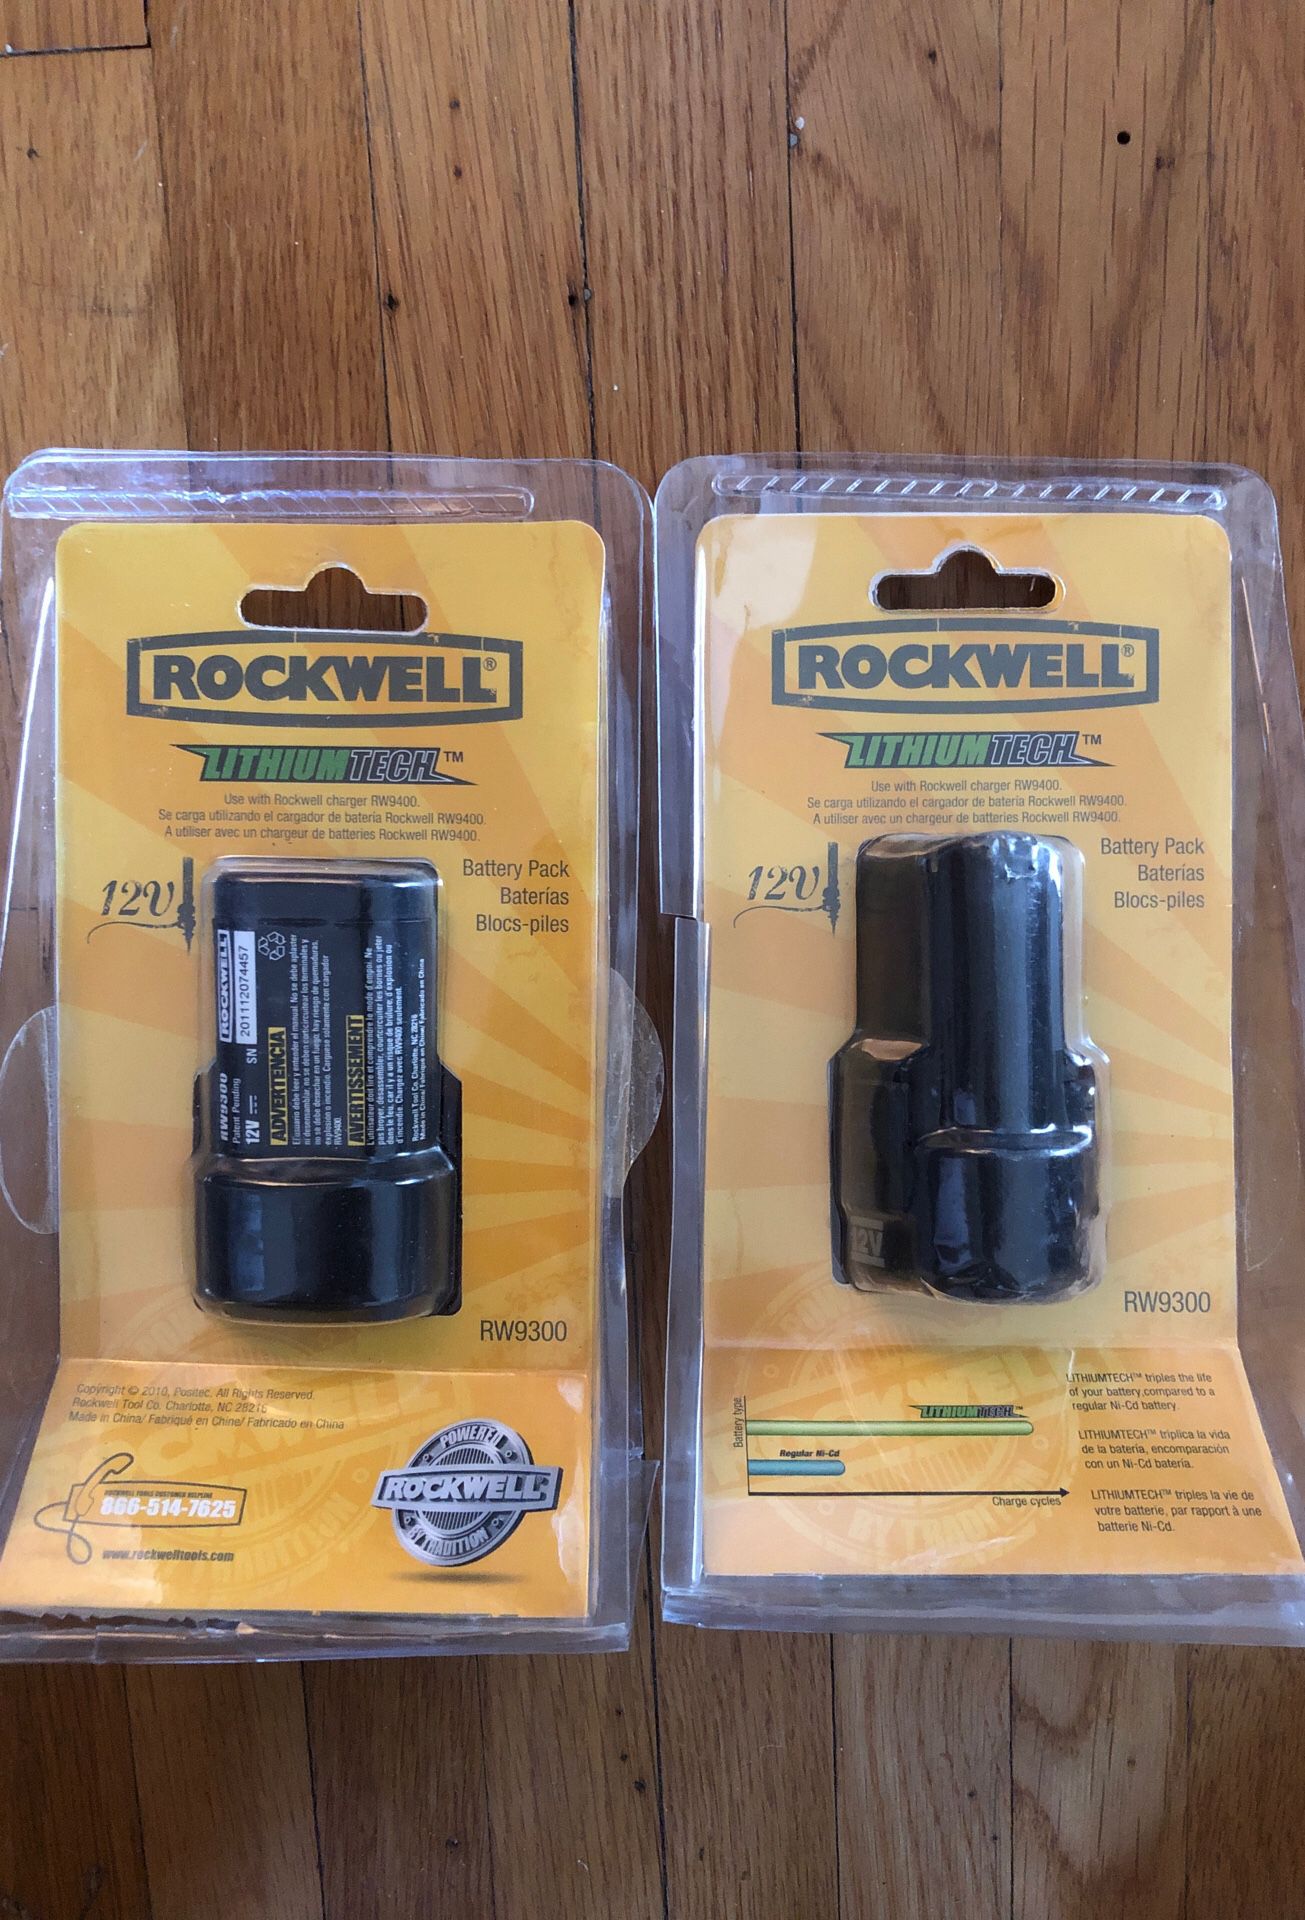 12 volt lithium batteries by Rockwell (2 batteries)